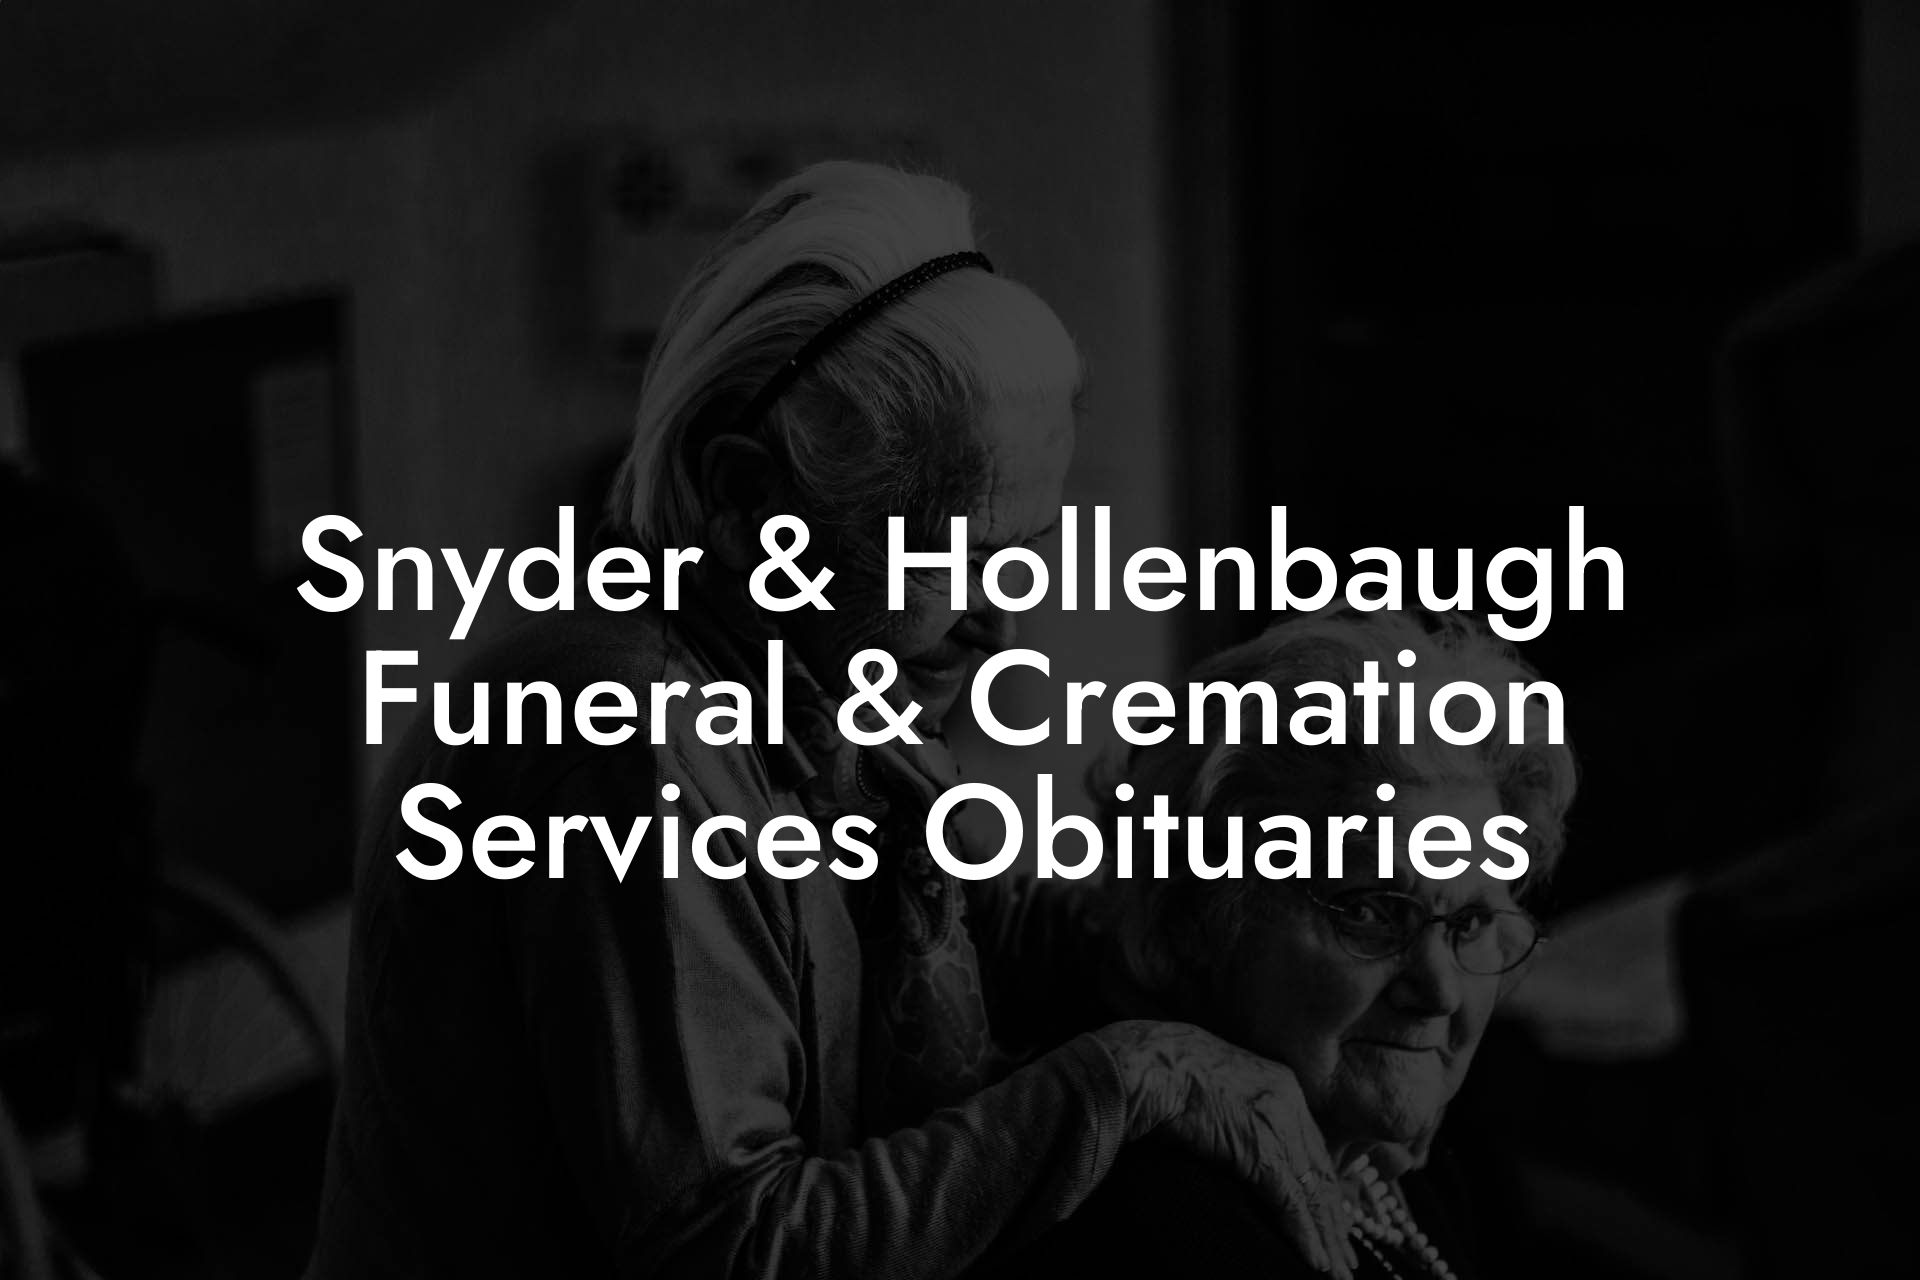 Snyder & hollenbaugh funeral & cremation services obituaries